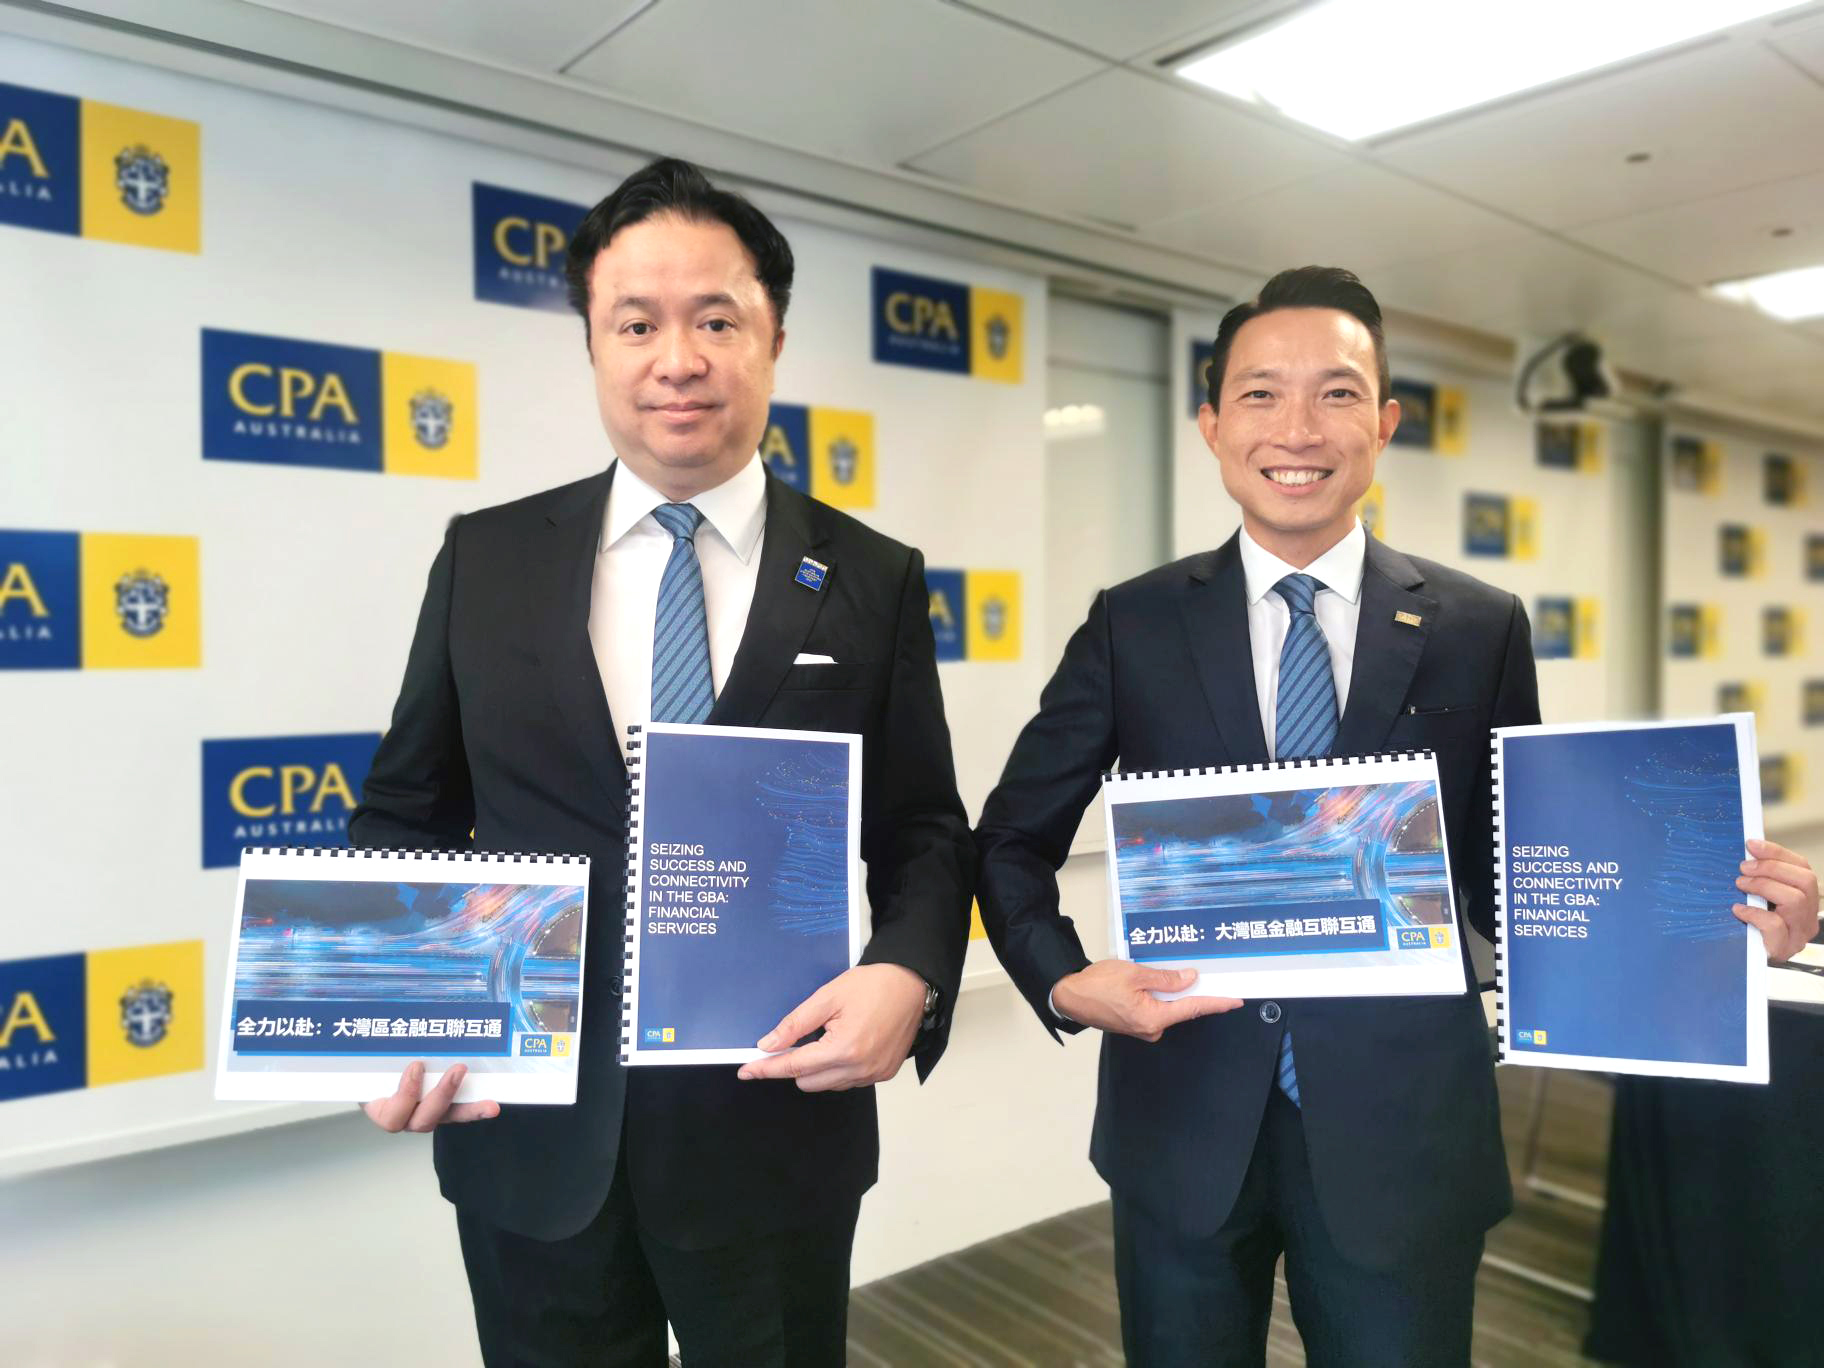 (from left to right) Eden Wong, CPA Australia President of the 2022 Greater China Divisional Council and Chair of the Financial Services Committee and Wilson Pang, Divisional Councillor in Greater China and Deputy Chair of the Greater Bay Area Committee at CPA Australia